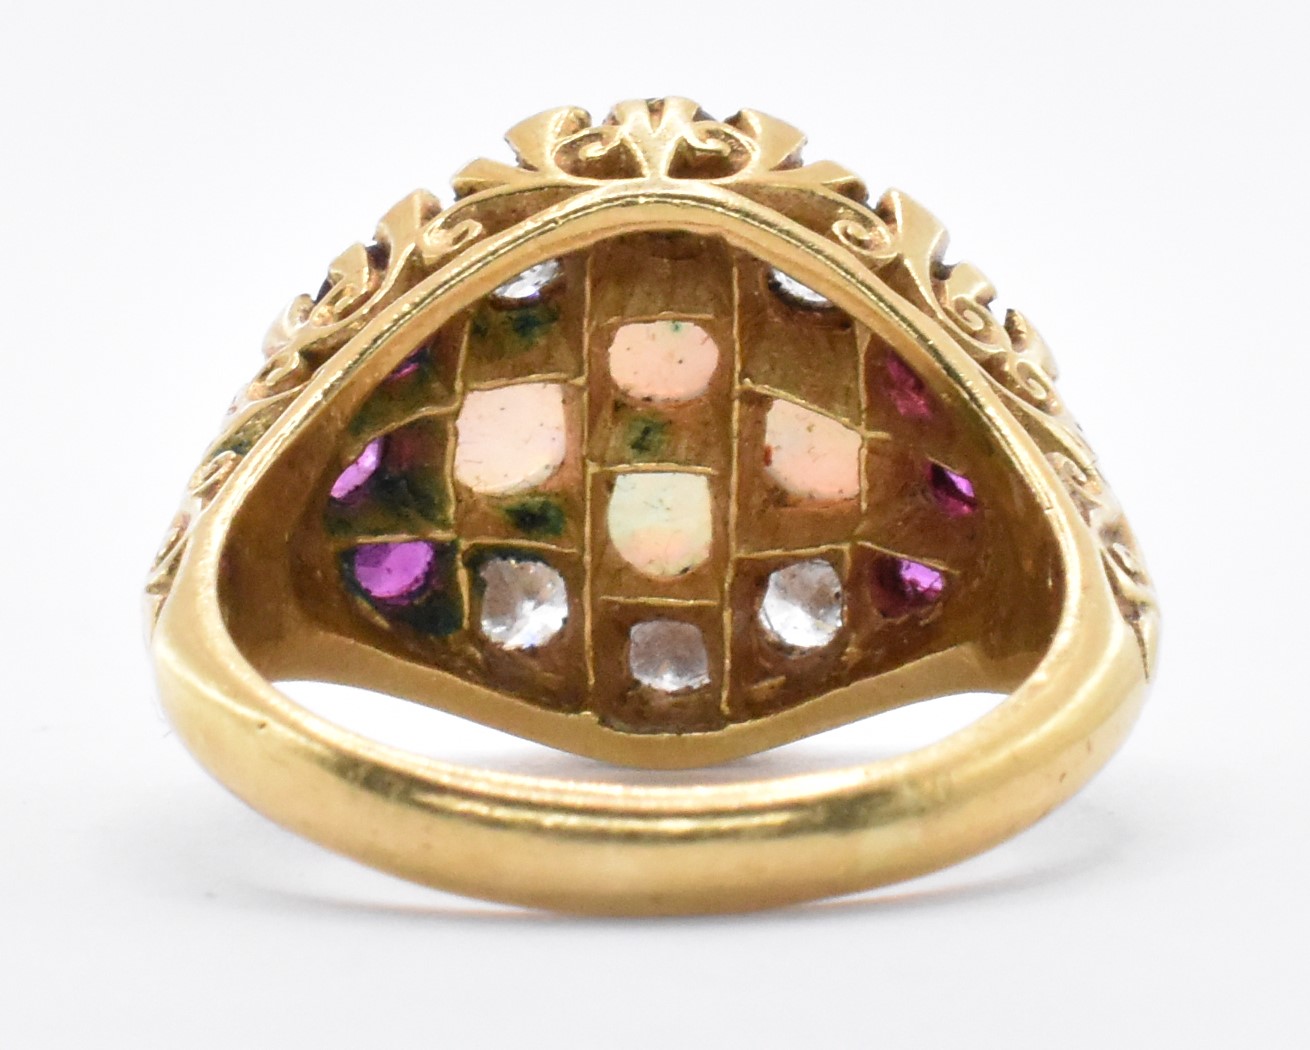 18CT GOLD OPAL DIAMOND & RUBY RING - Image 3 of 7